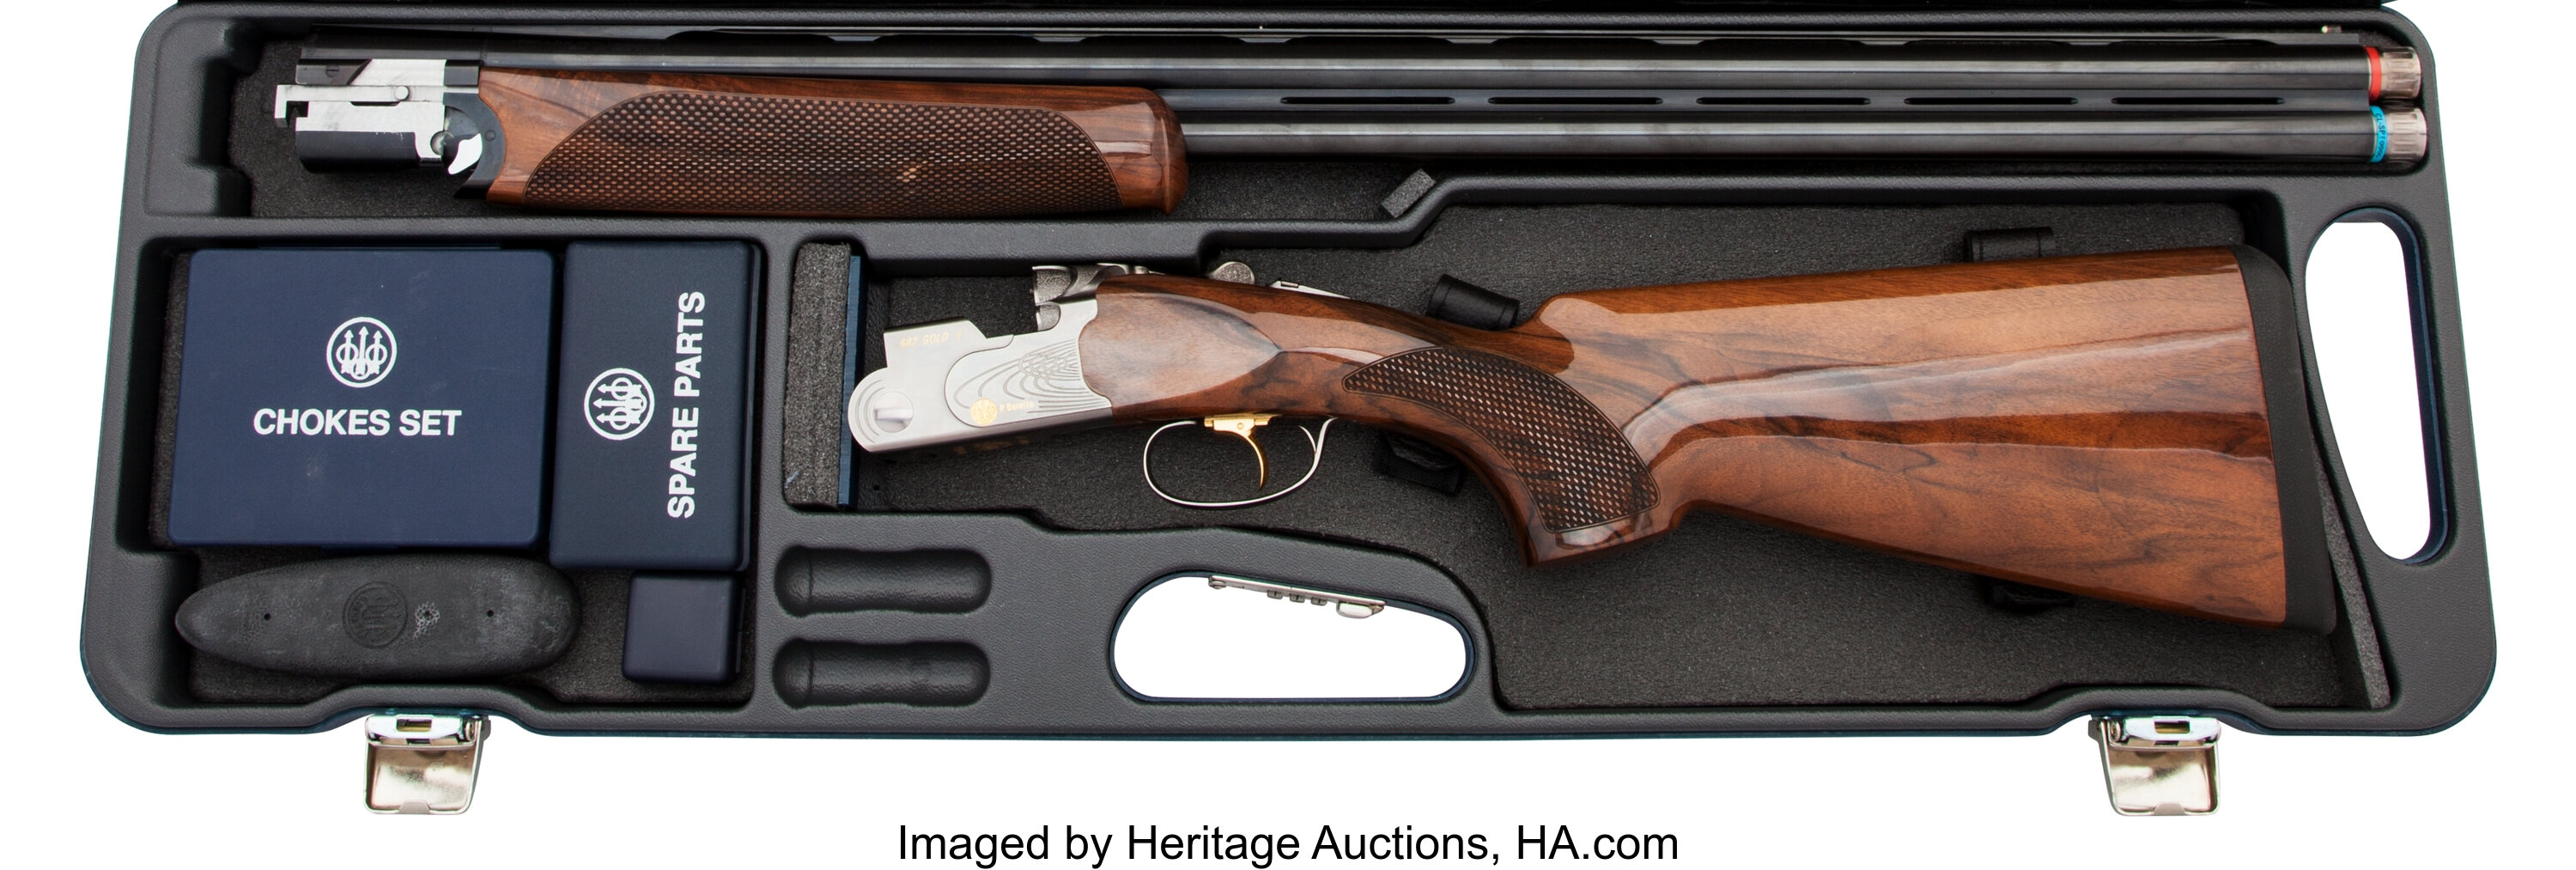 Cased P Beretta Model 6 Gold E Over And Under Shotgun Lot Heritage Auctions